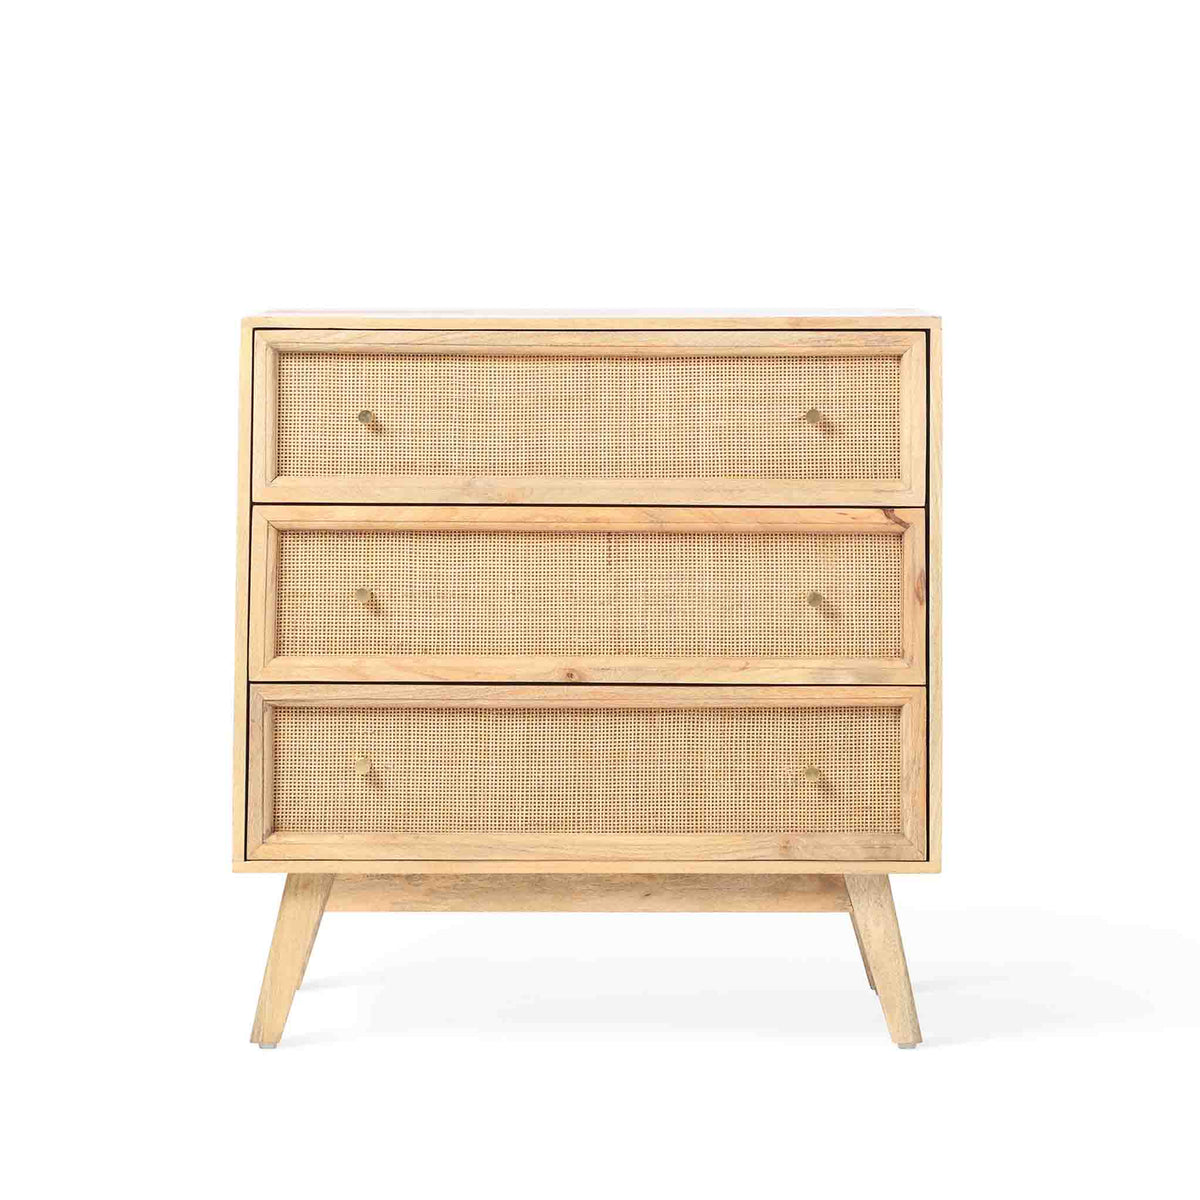 Venti Natural Mango Wood & Cane Compact 3 Drawer Chest from Roseland Furniture